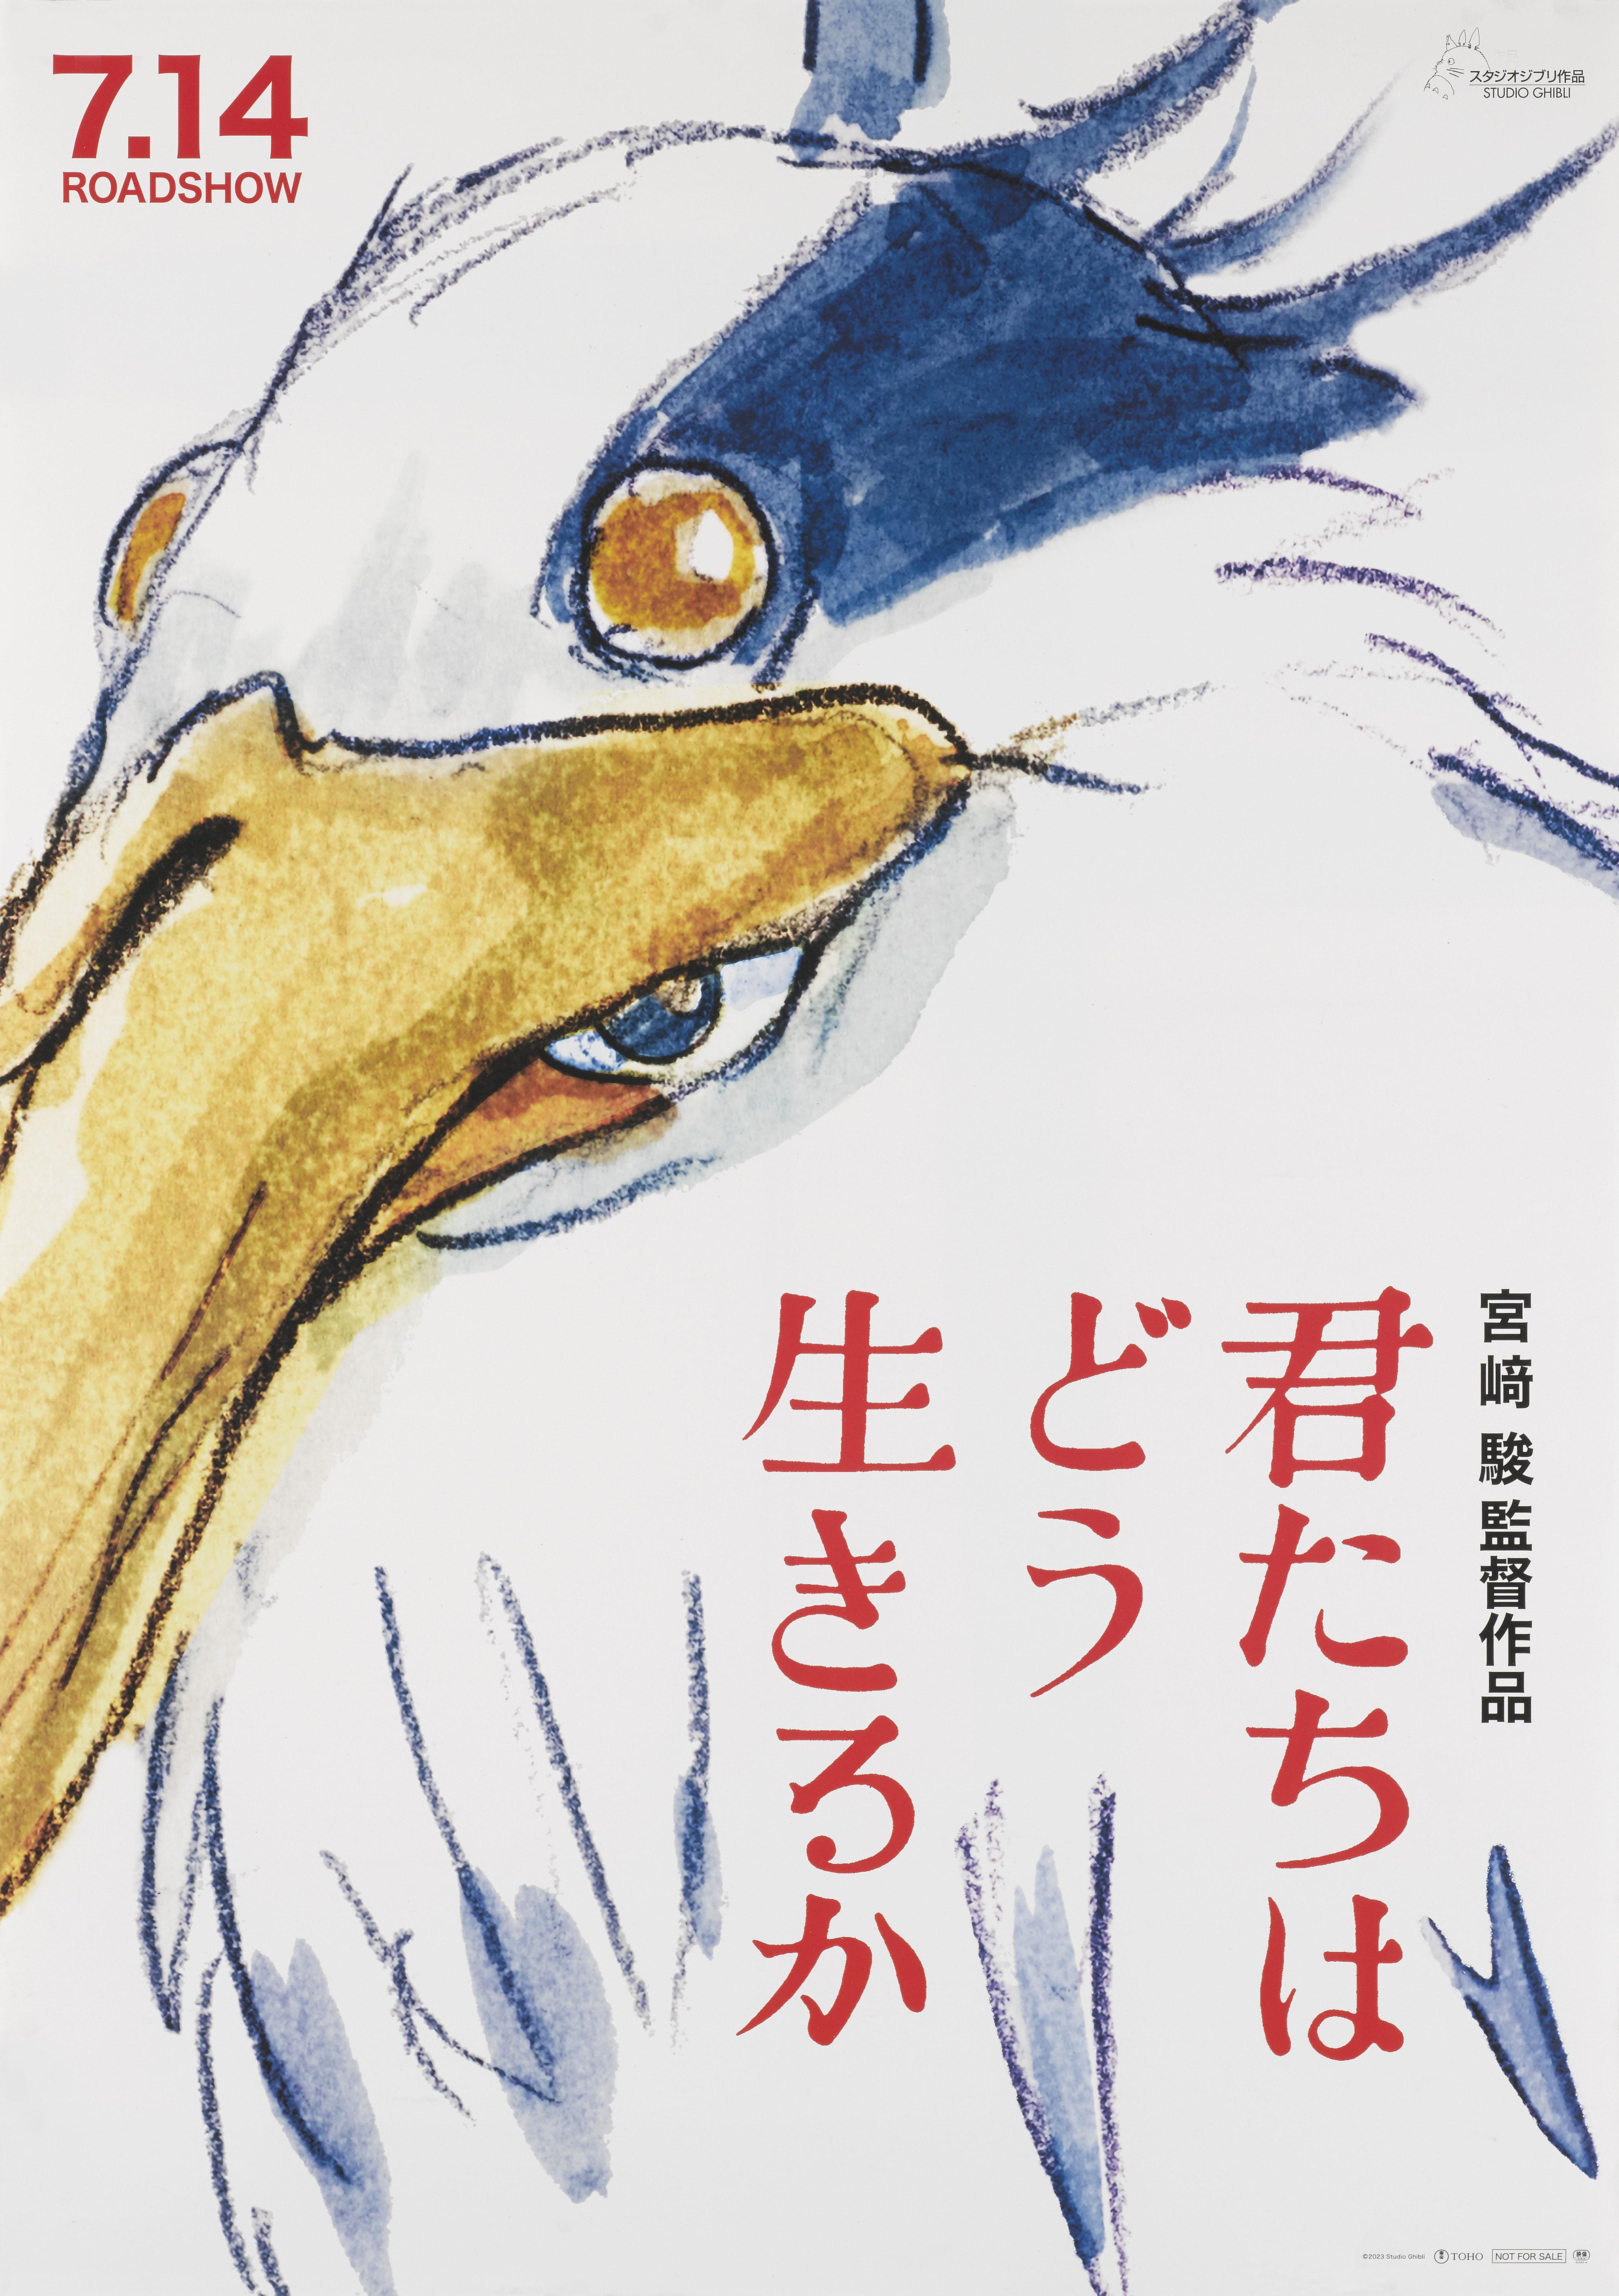 Original Japanese film poster for the 2023 Studio Ghibli animation,
Kimitachi wa do Ikiru ka / The Boy and the Heron.

This film was directed by Hayao Miyazaki and the art work on the poster is by Takeshi Honda (b.1968)
The poster is unfolded in